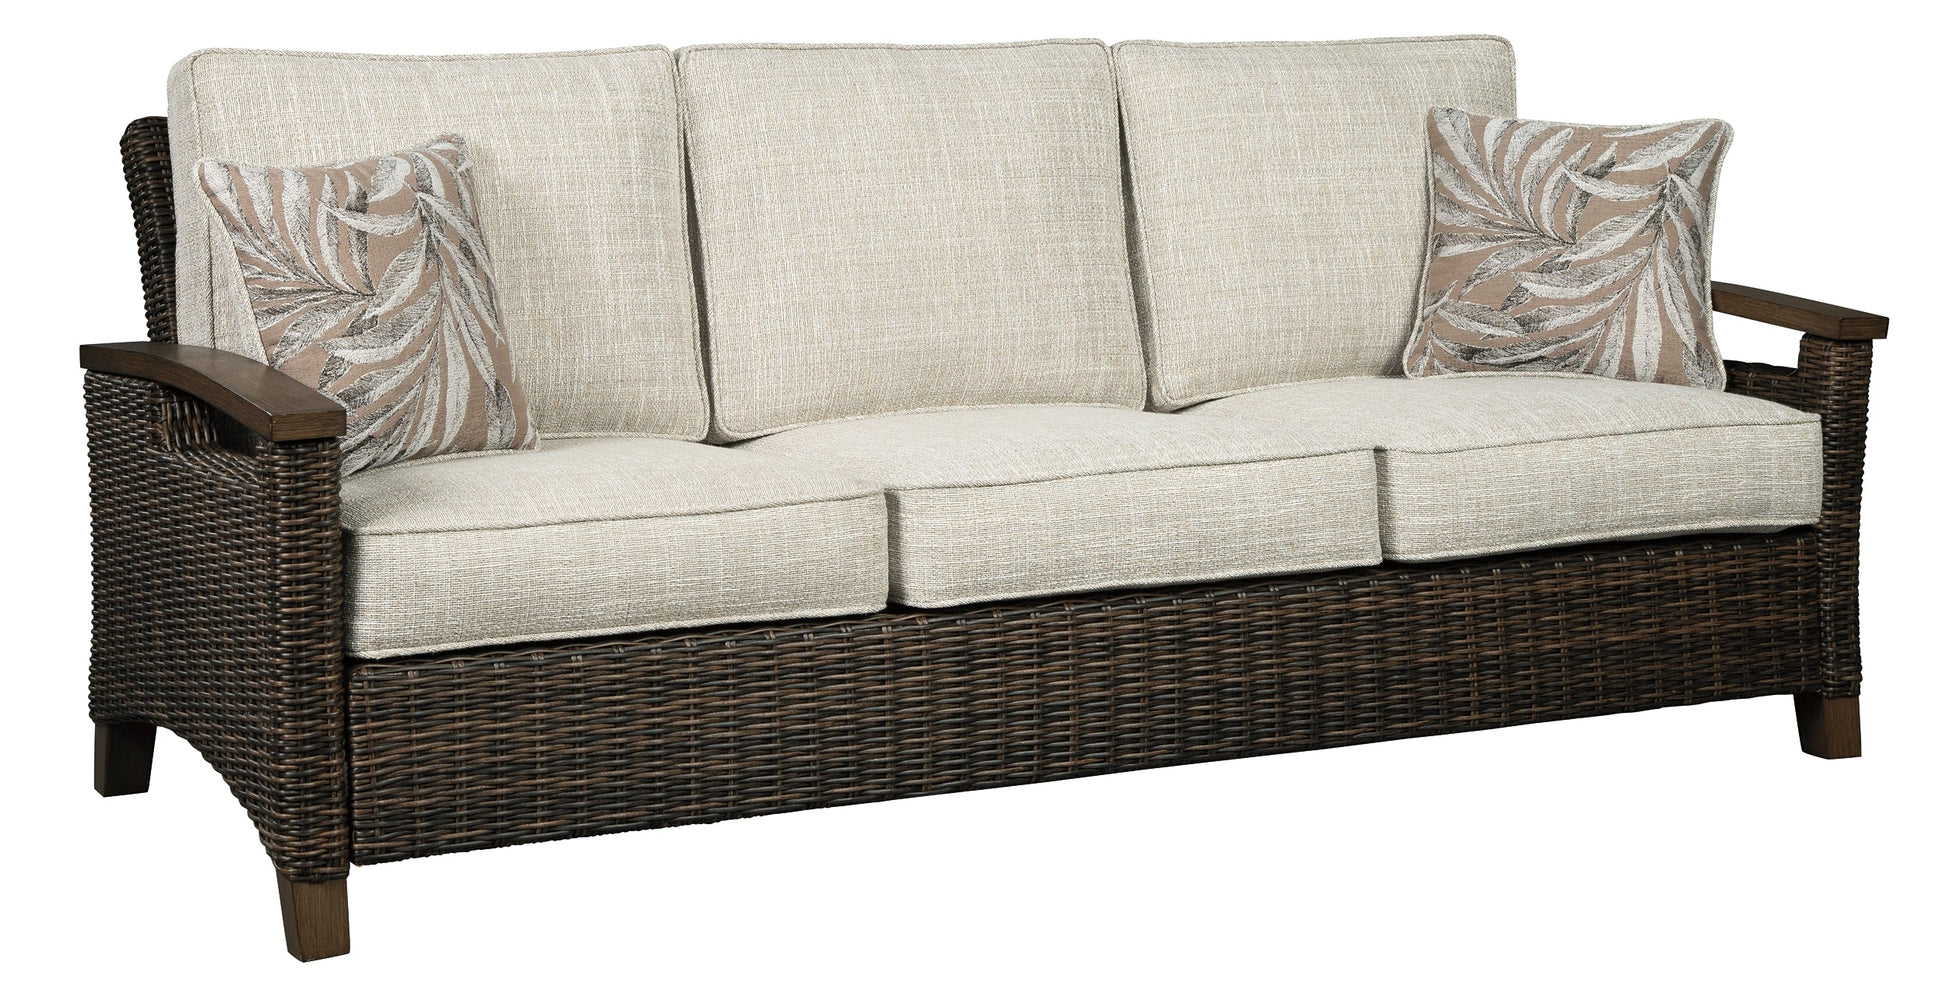 Paradise Trail Sofa with Cushion Rent Wise Rent To Own Jacksonville, Florida